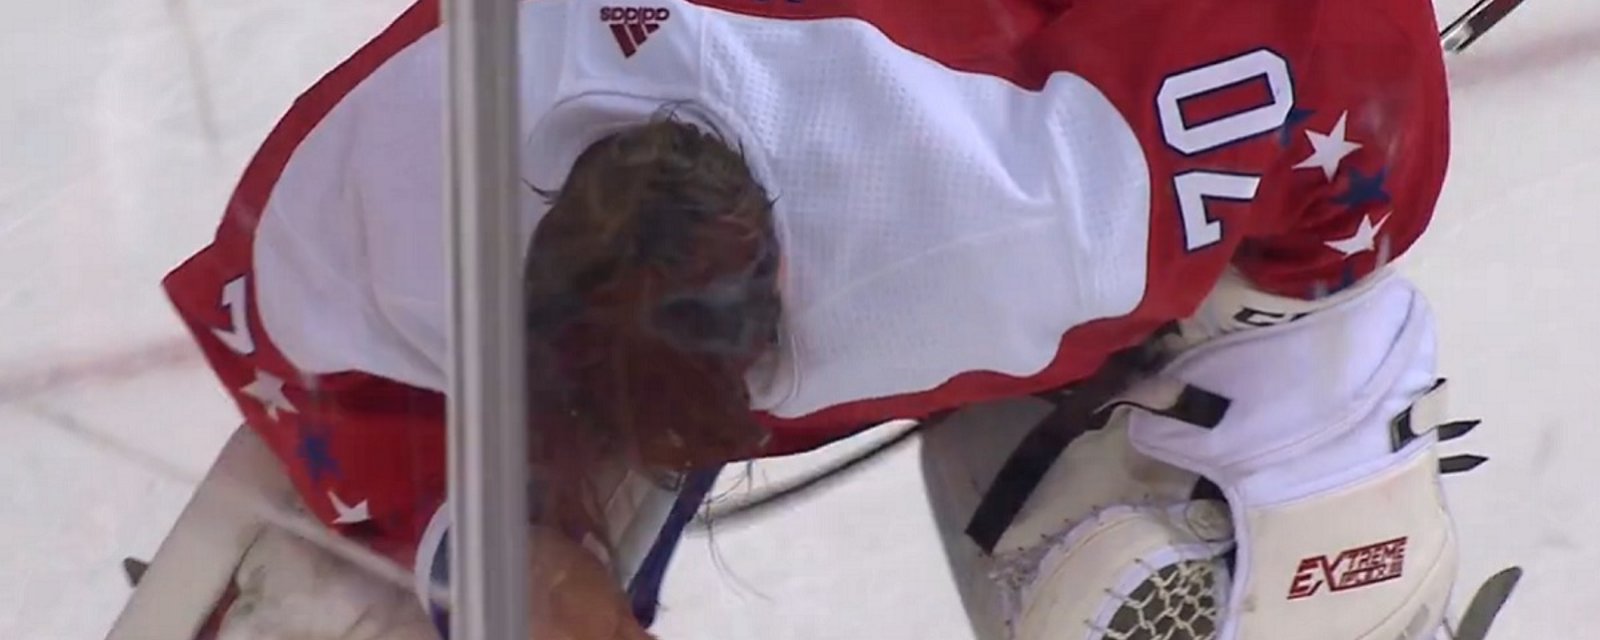 Breaking: Holtby leaves the game after Atkinson's stick goes through his mask.